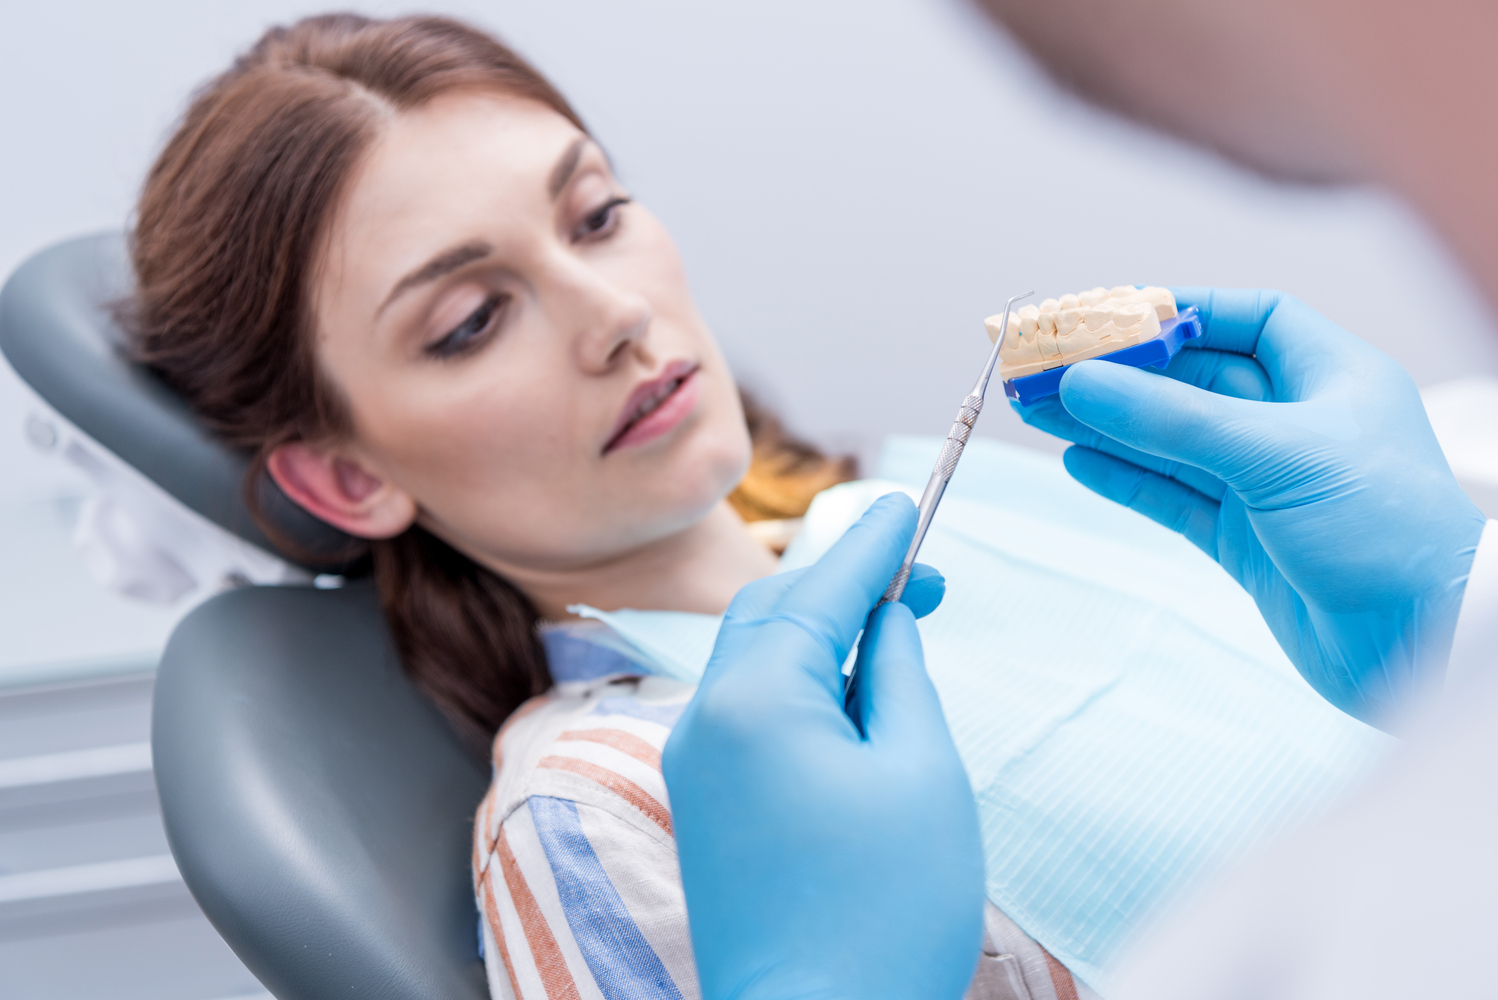 dentist showing dental mold to focused patient in dentist office